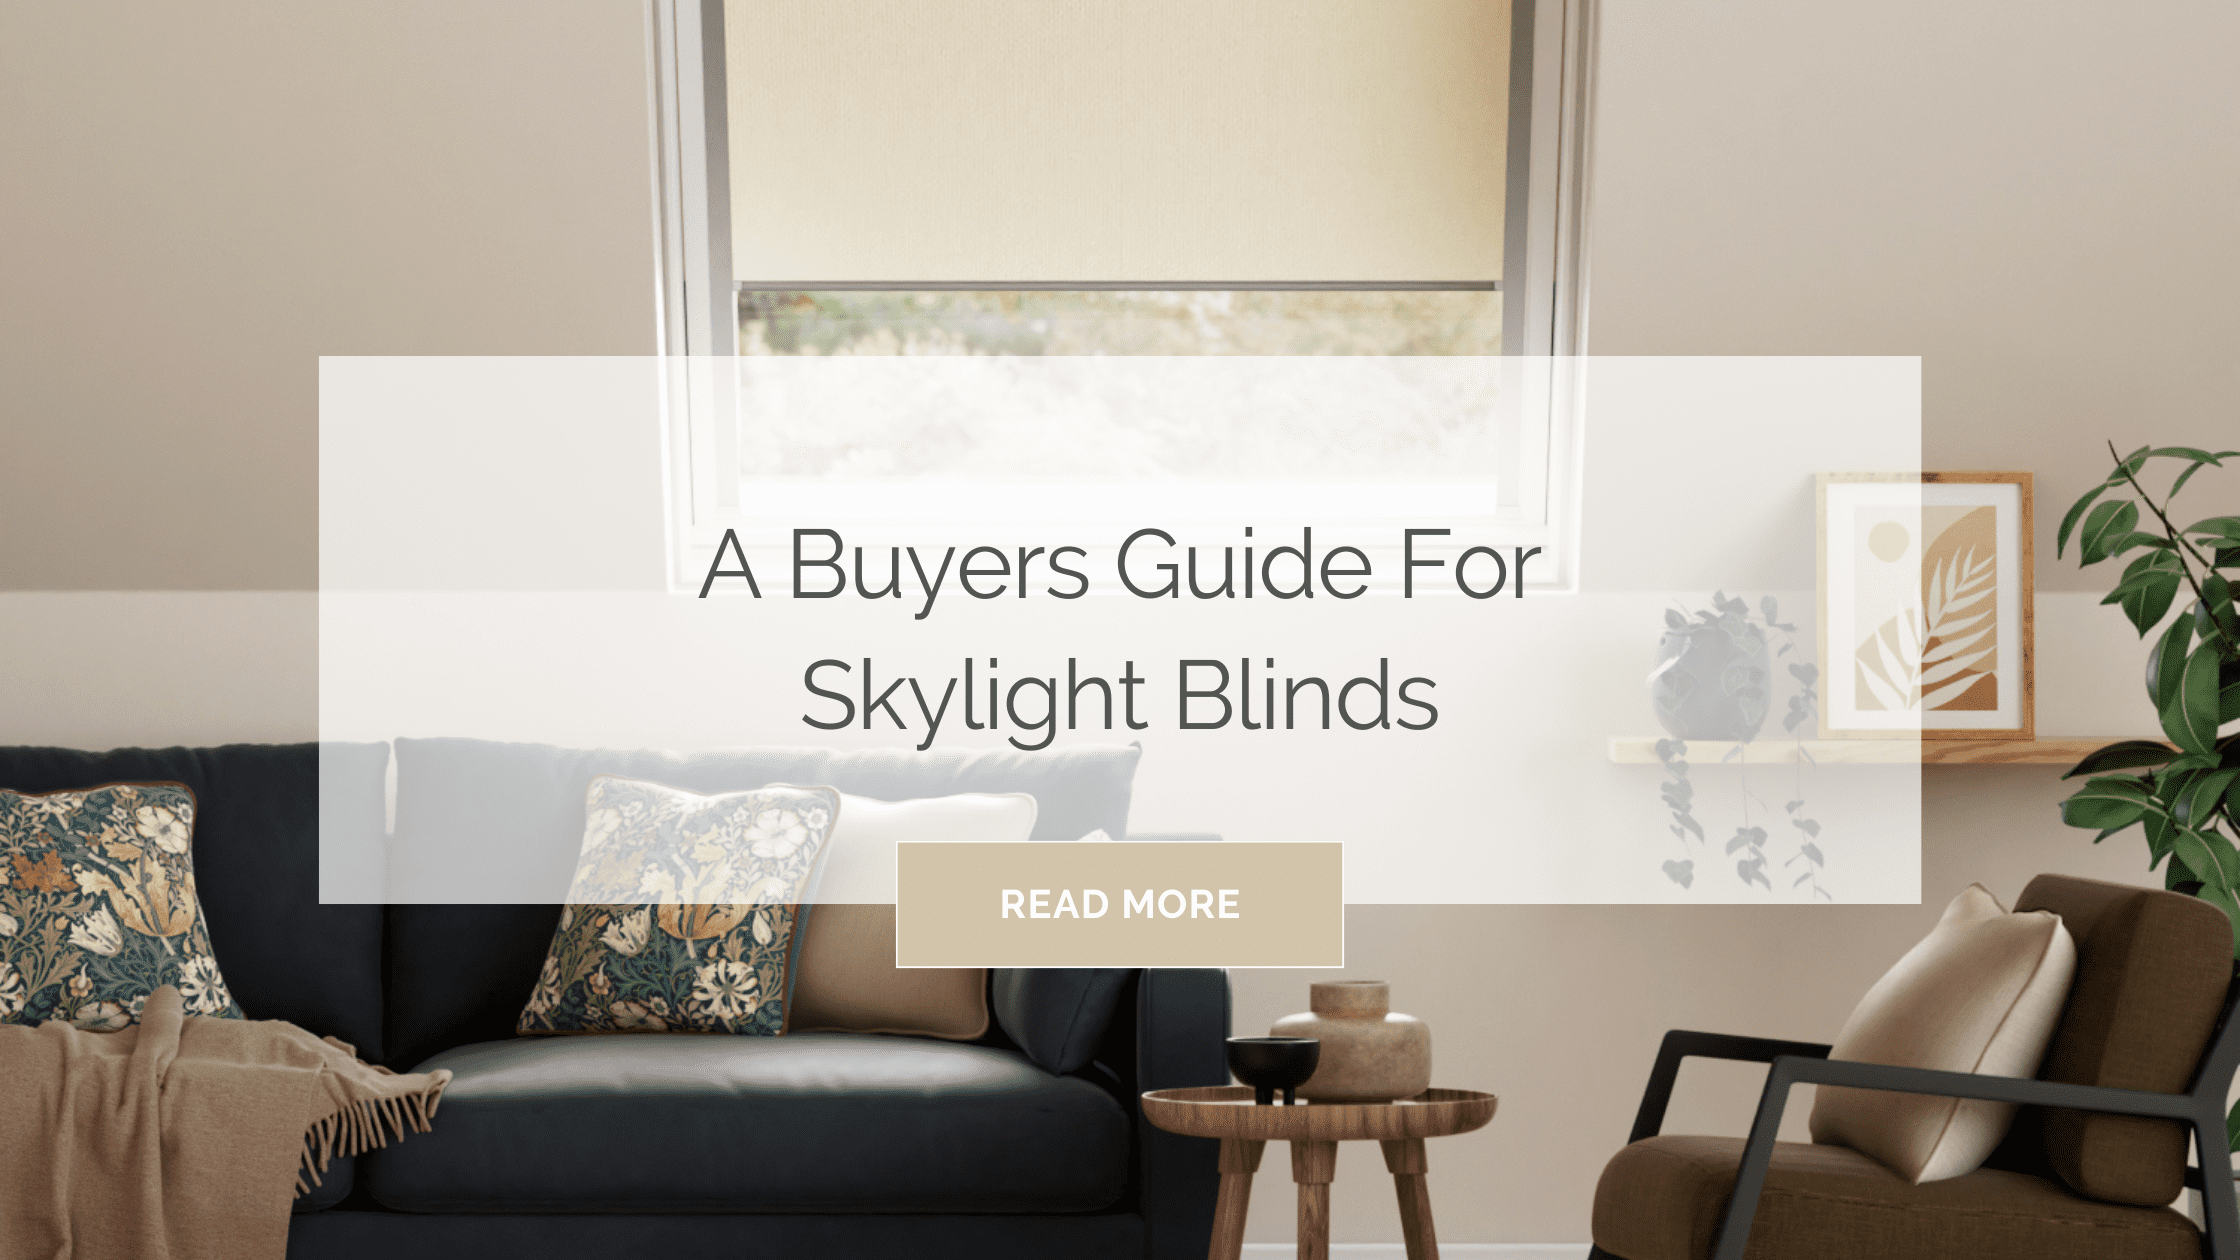 Buyers guide for Skylight Blinds